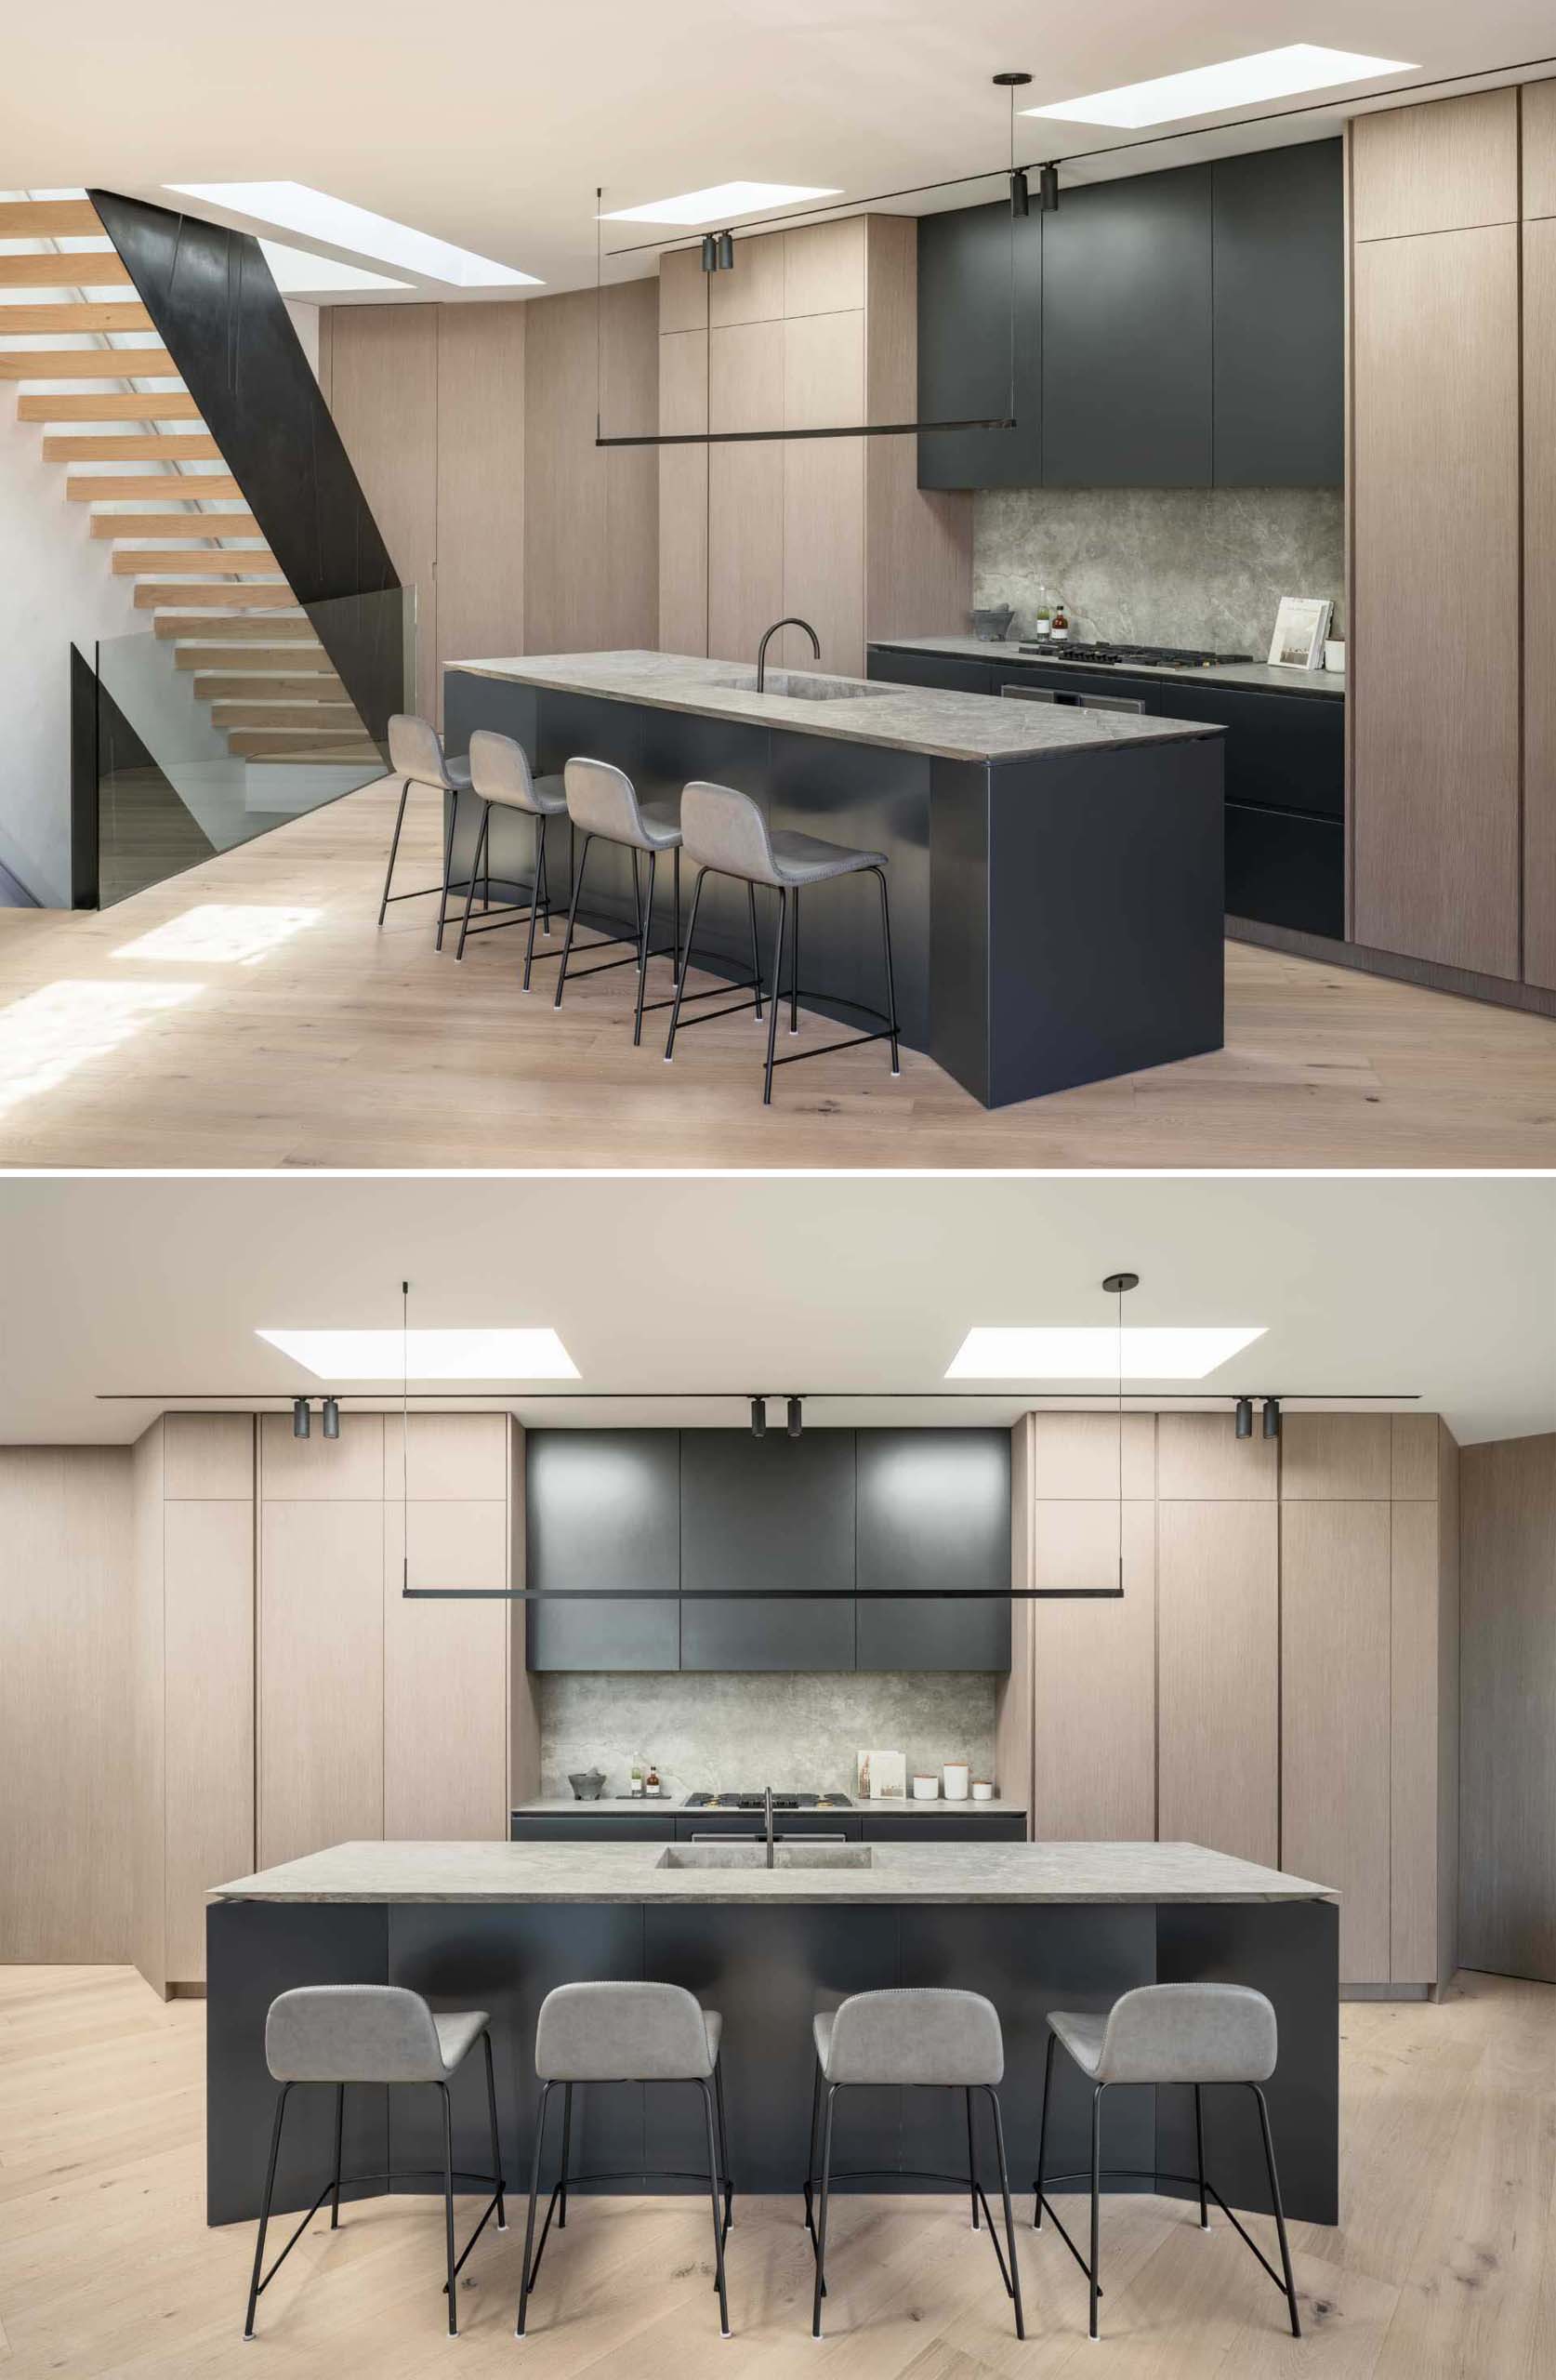 In this modern kitchen, the island provides workspace and an informal cantilevered seating area, while the minimalist light fixture above the island complements the black cabinetry and nearby stairs.